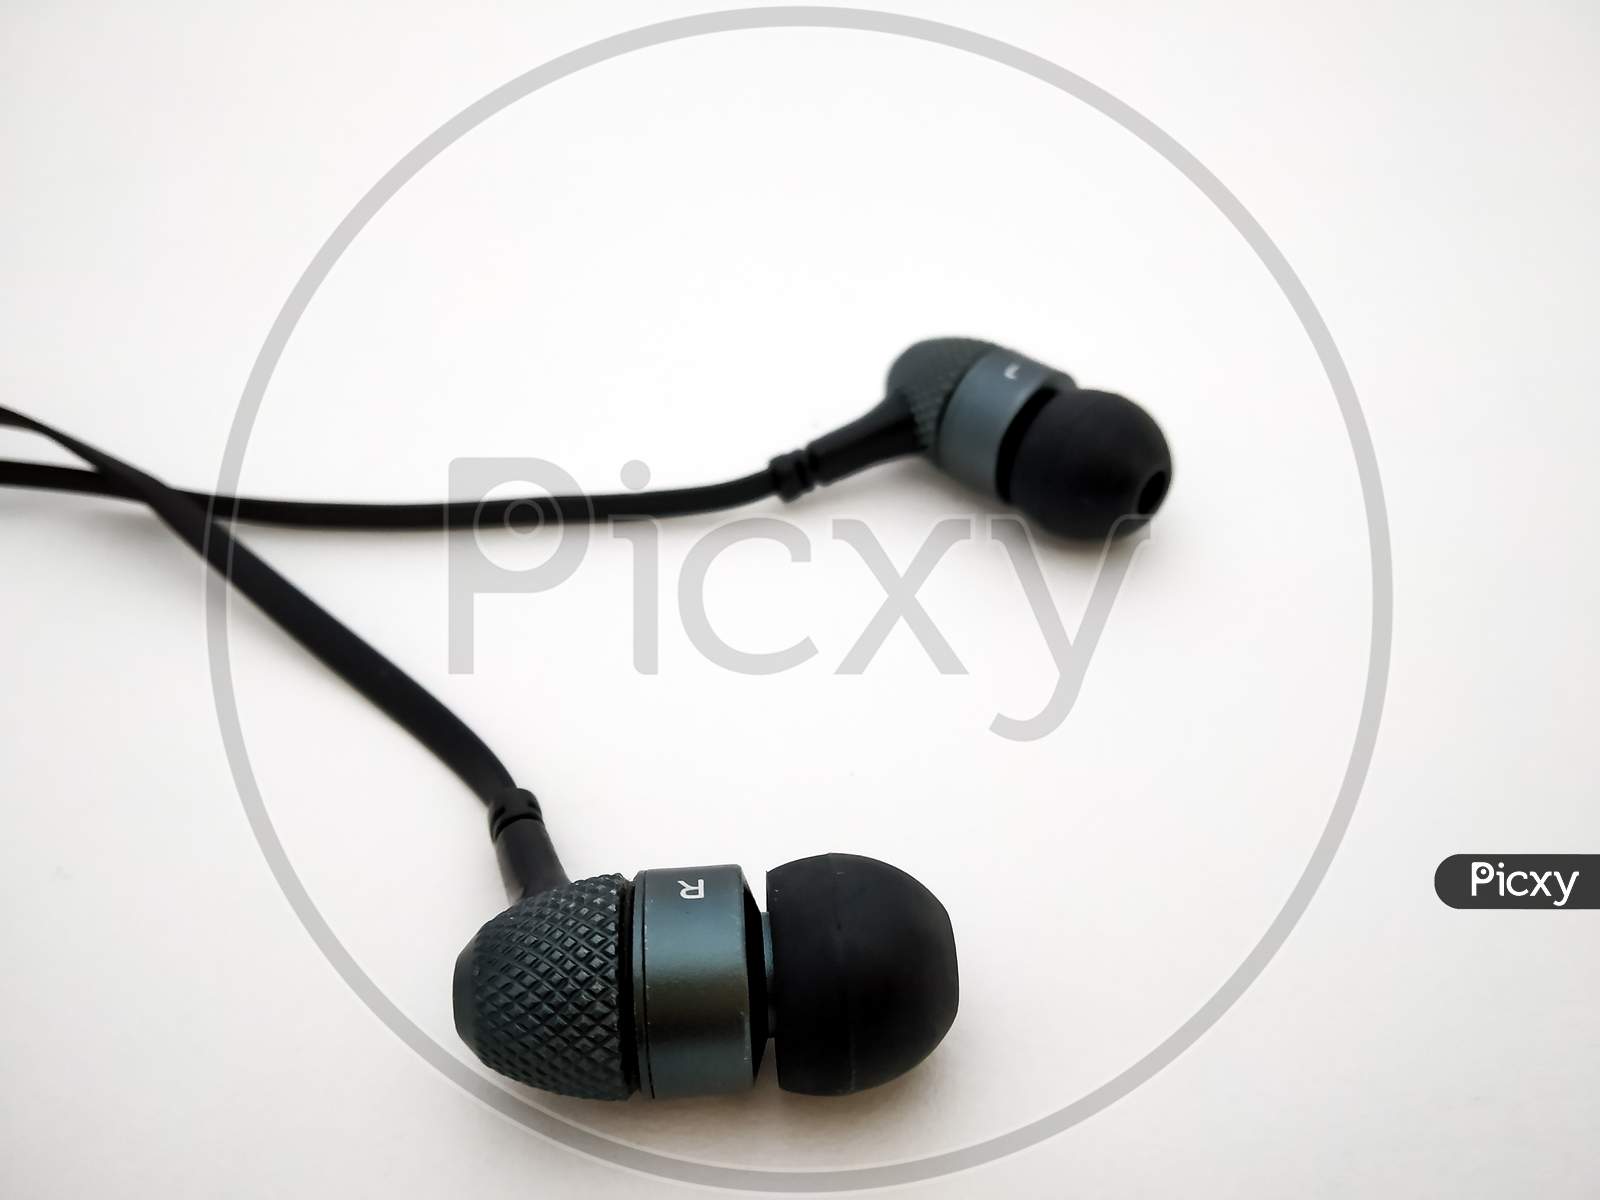 Headphones Earphone Close Up Isolated With White Background